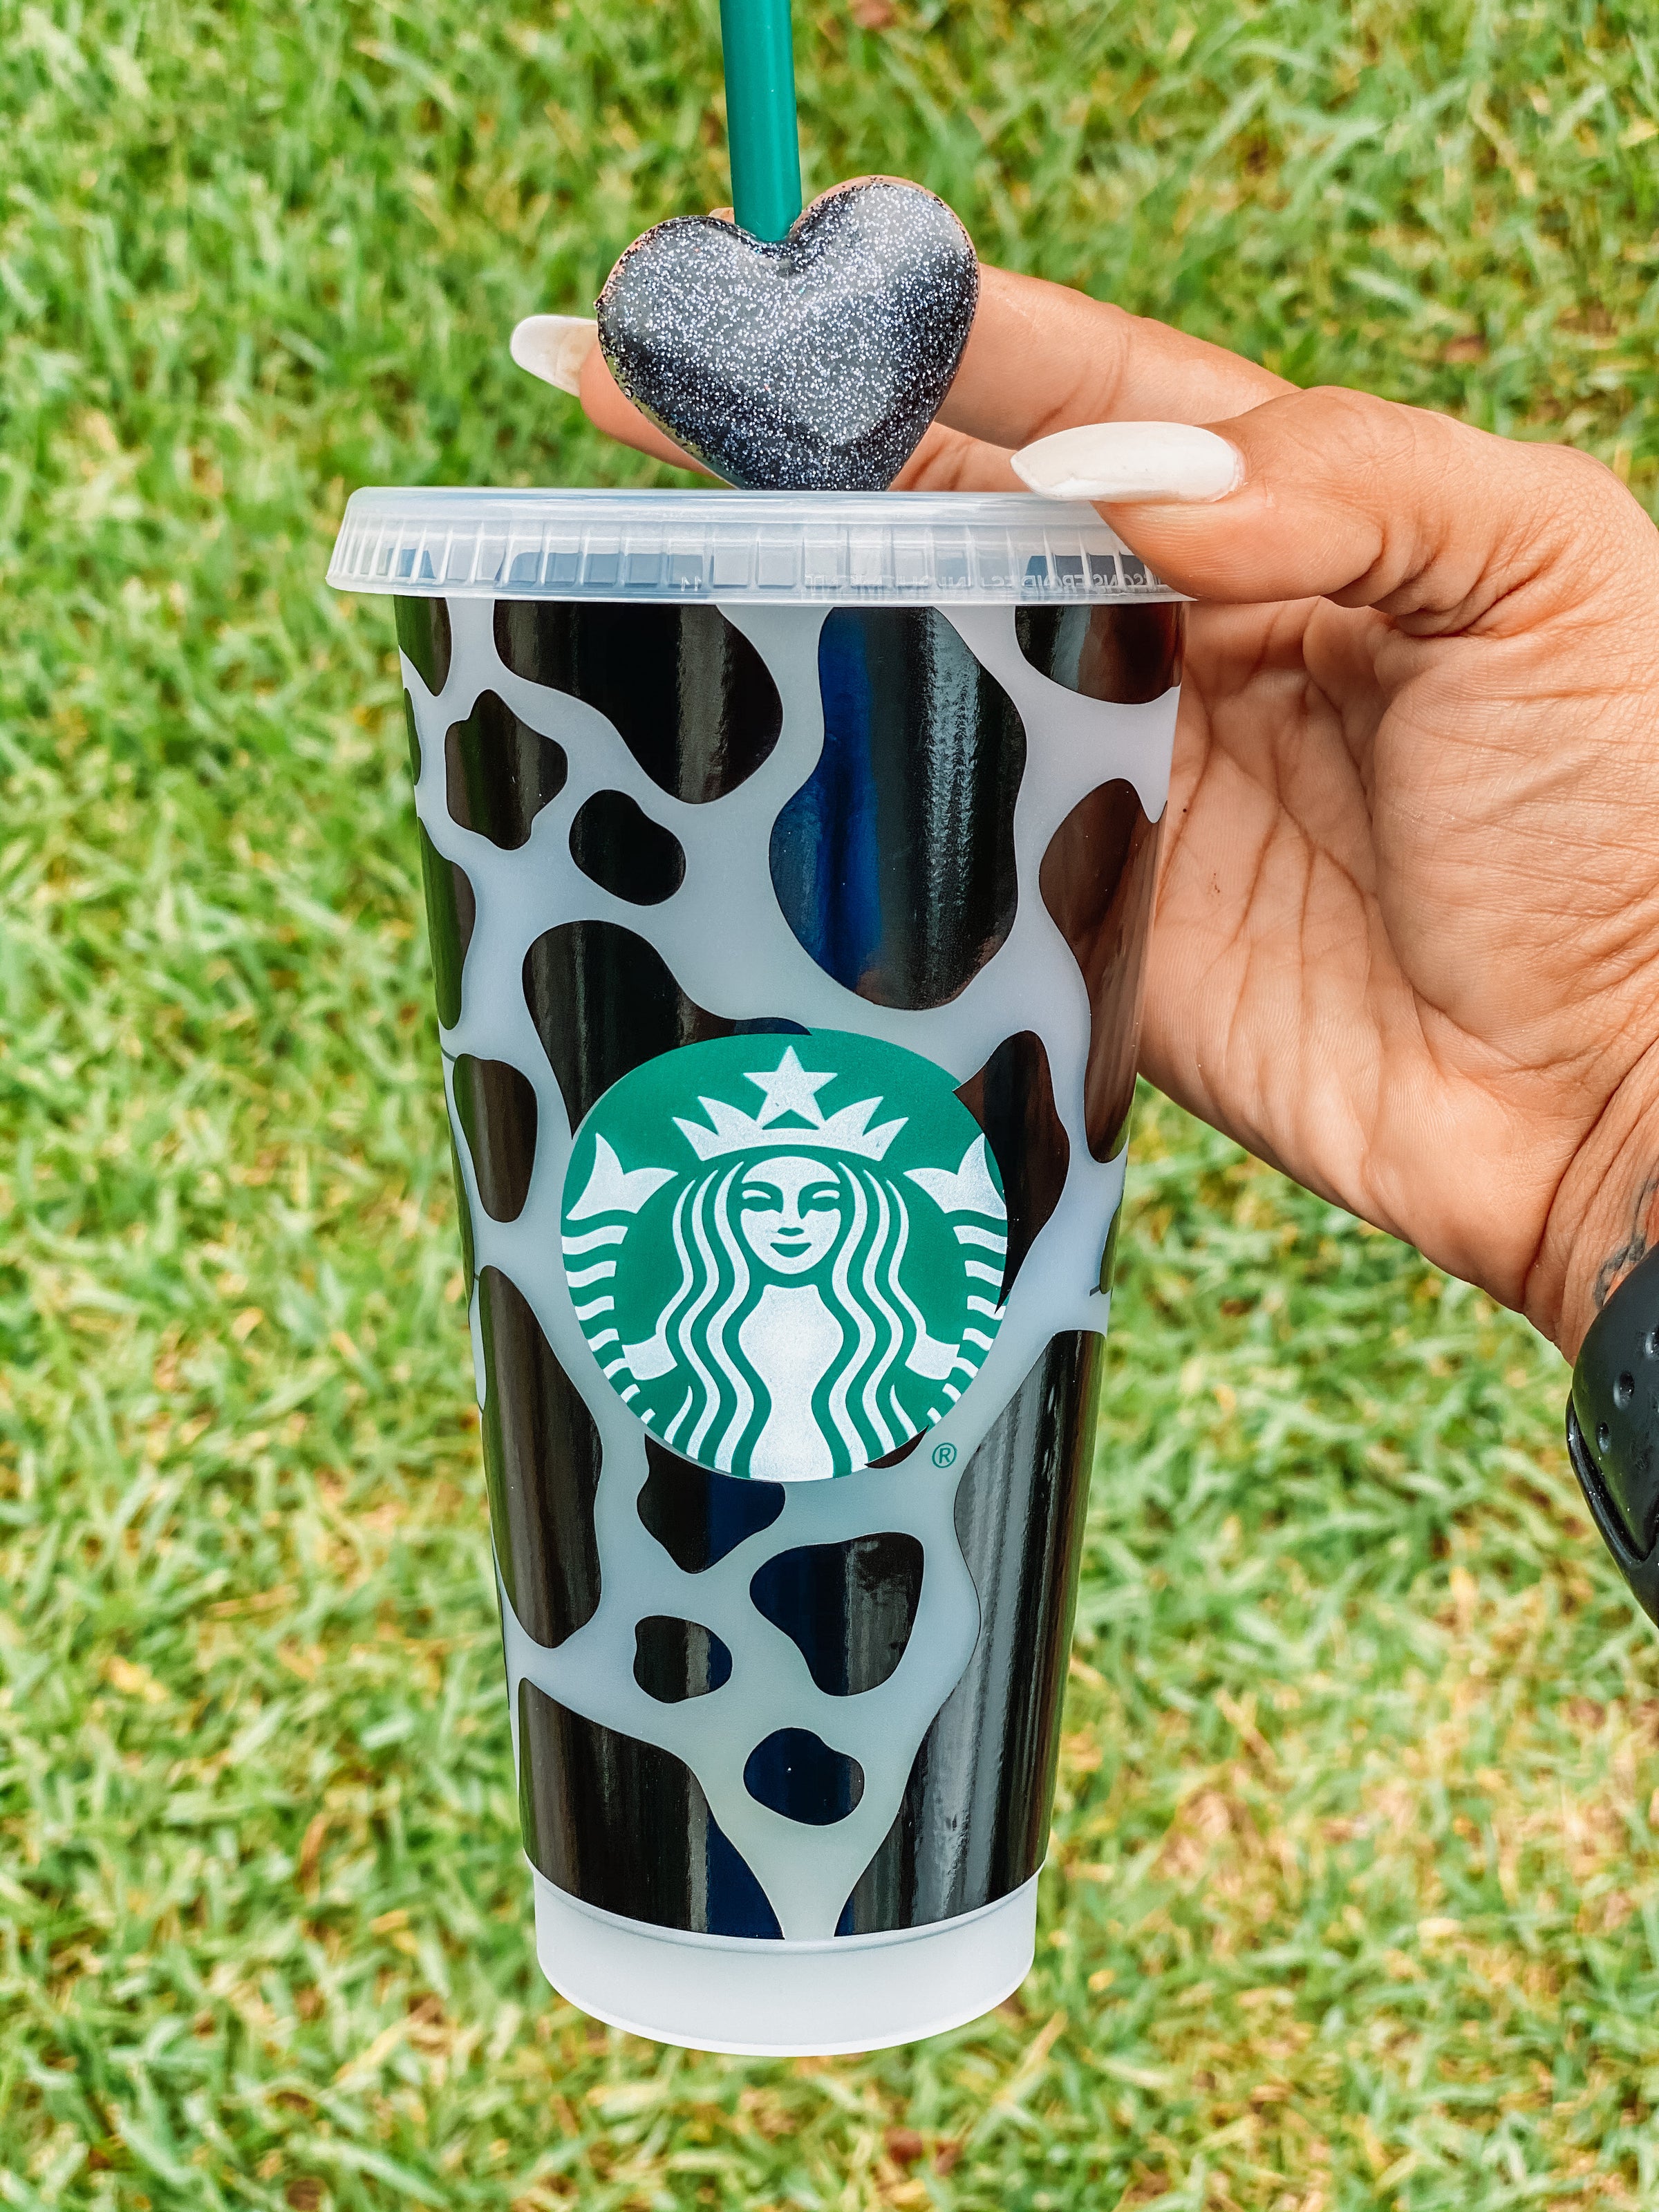 Starbucks Reusable Venti Cup, Cow Print, Personalized Cup with Name, Gift for Best Friend, Sister Gift, Birthday Gift, Starbucks